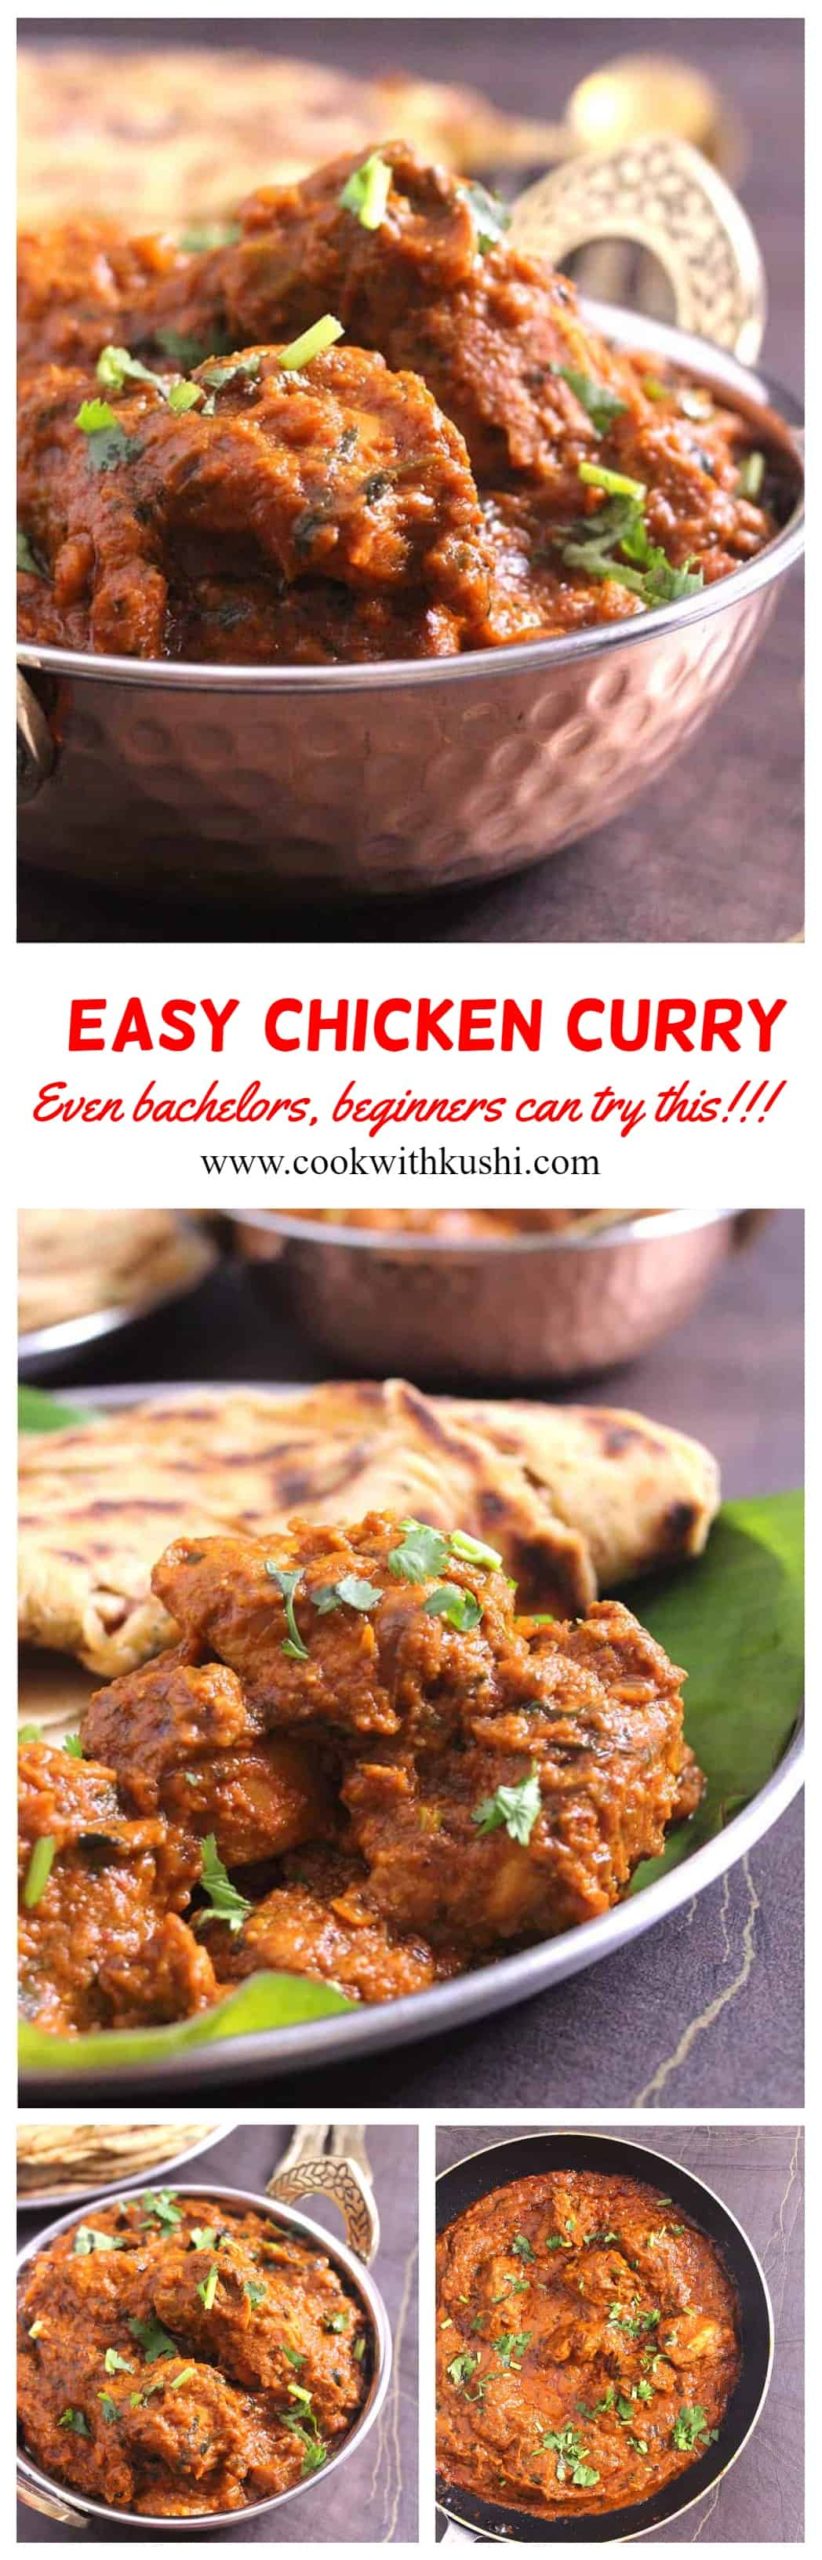 This easy restaurant-style chicken curry is simple, spicy, and delicious with soft, tender, and juicy chicken pieces. This is one of the easiest Indian-style chicken dishes that even a bachelor or beginner (novice) can cook. #easychicken #chickendinner #chickenrecipes #Indian #Murgh